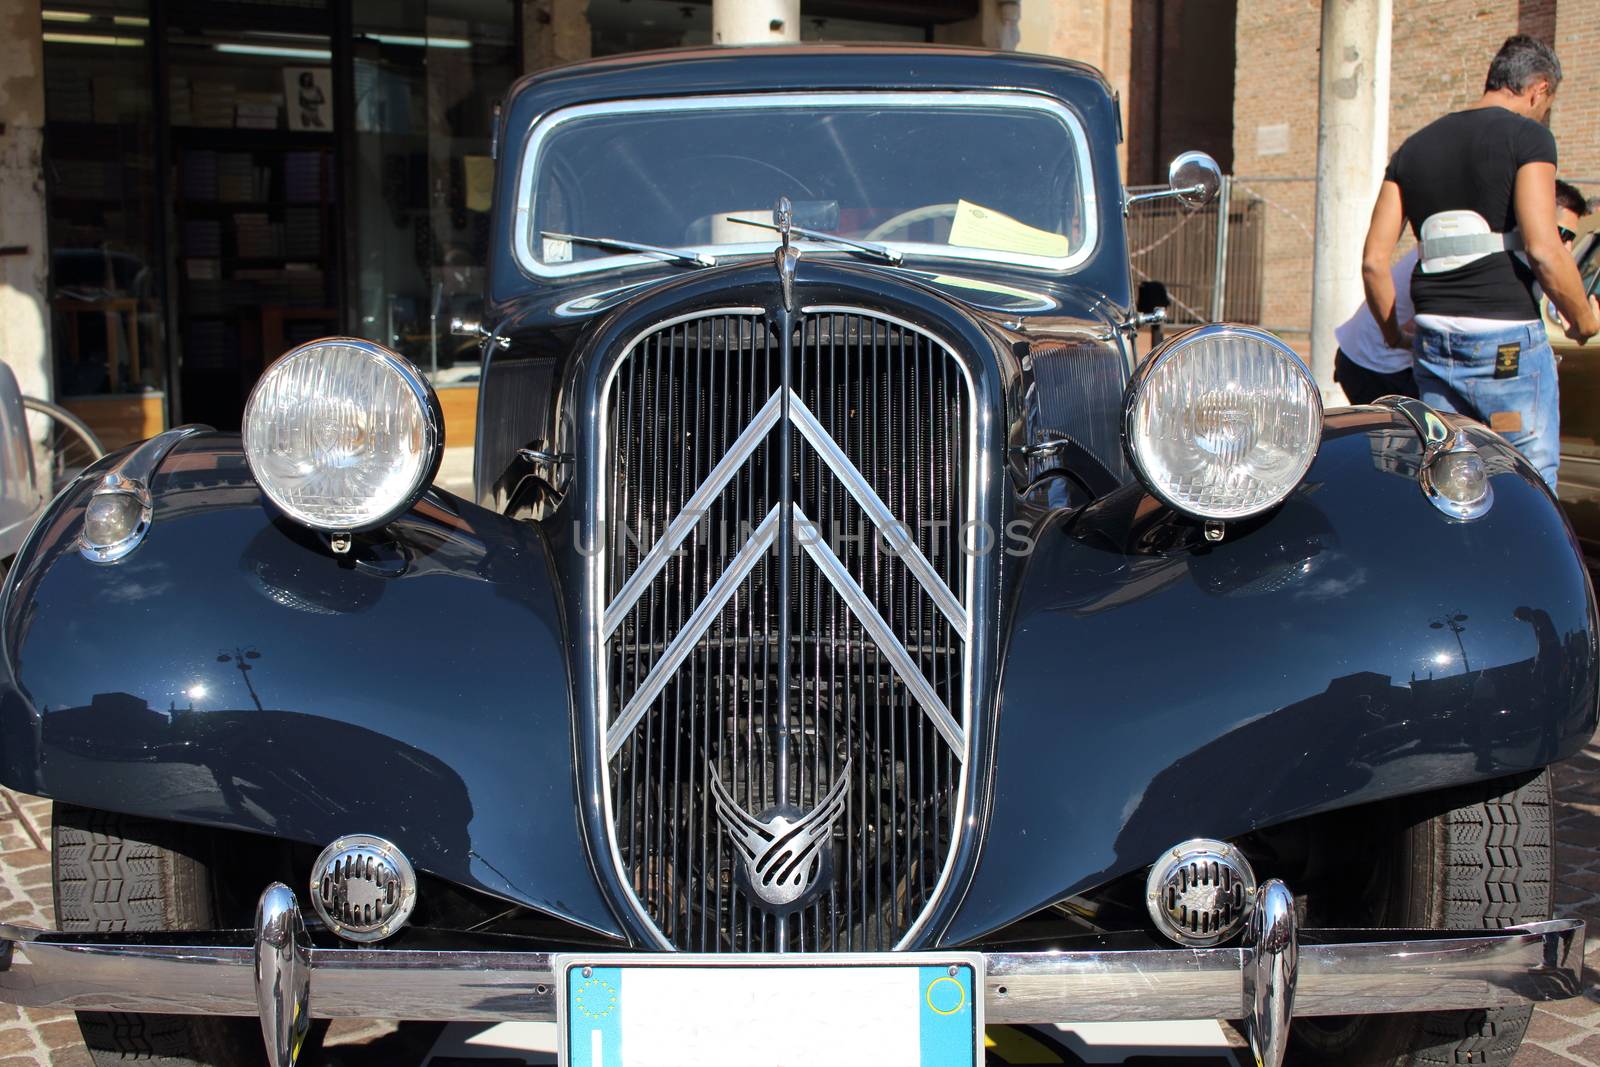 Ferrara, Italia - September 24, 2016: The event "AutoMotoStoriche in Old Town" you can admire an exhibition of cars and motorcycles in the historic center of Ferrara. Front of Citroen Traction Avant